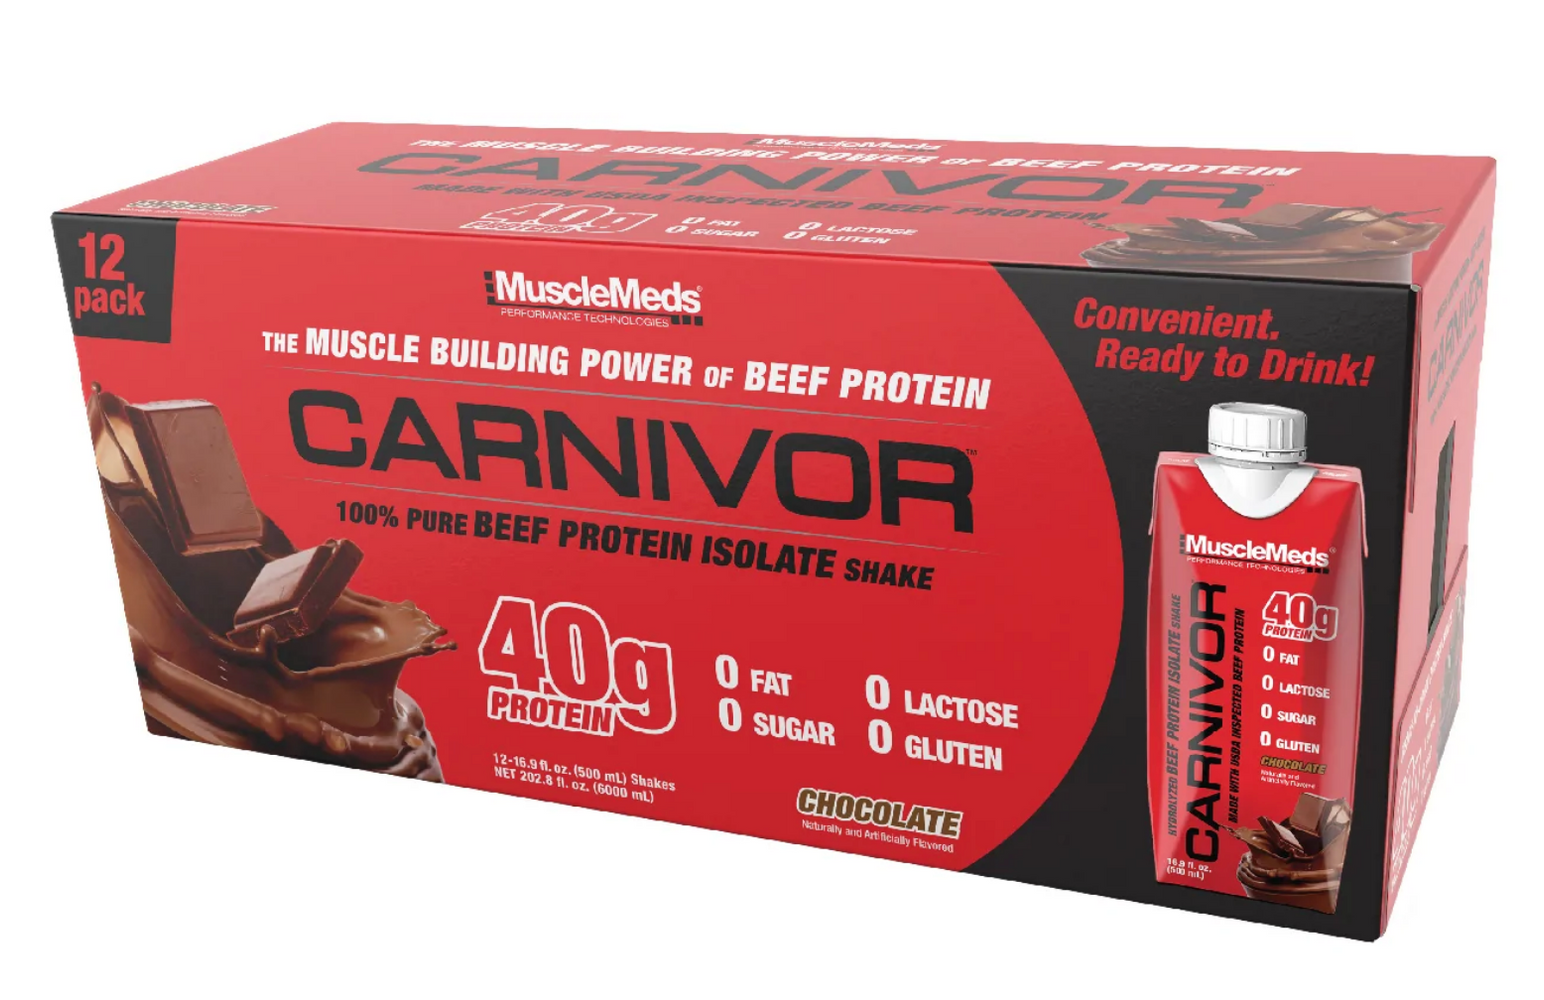 MuscleMeds Carnivor Ready-To-Drink Beef Protein Isolate Protein Shake, Chocolate Flavor, 12 ct